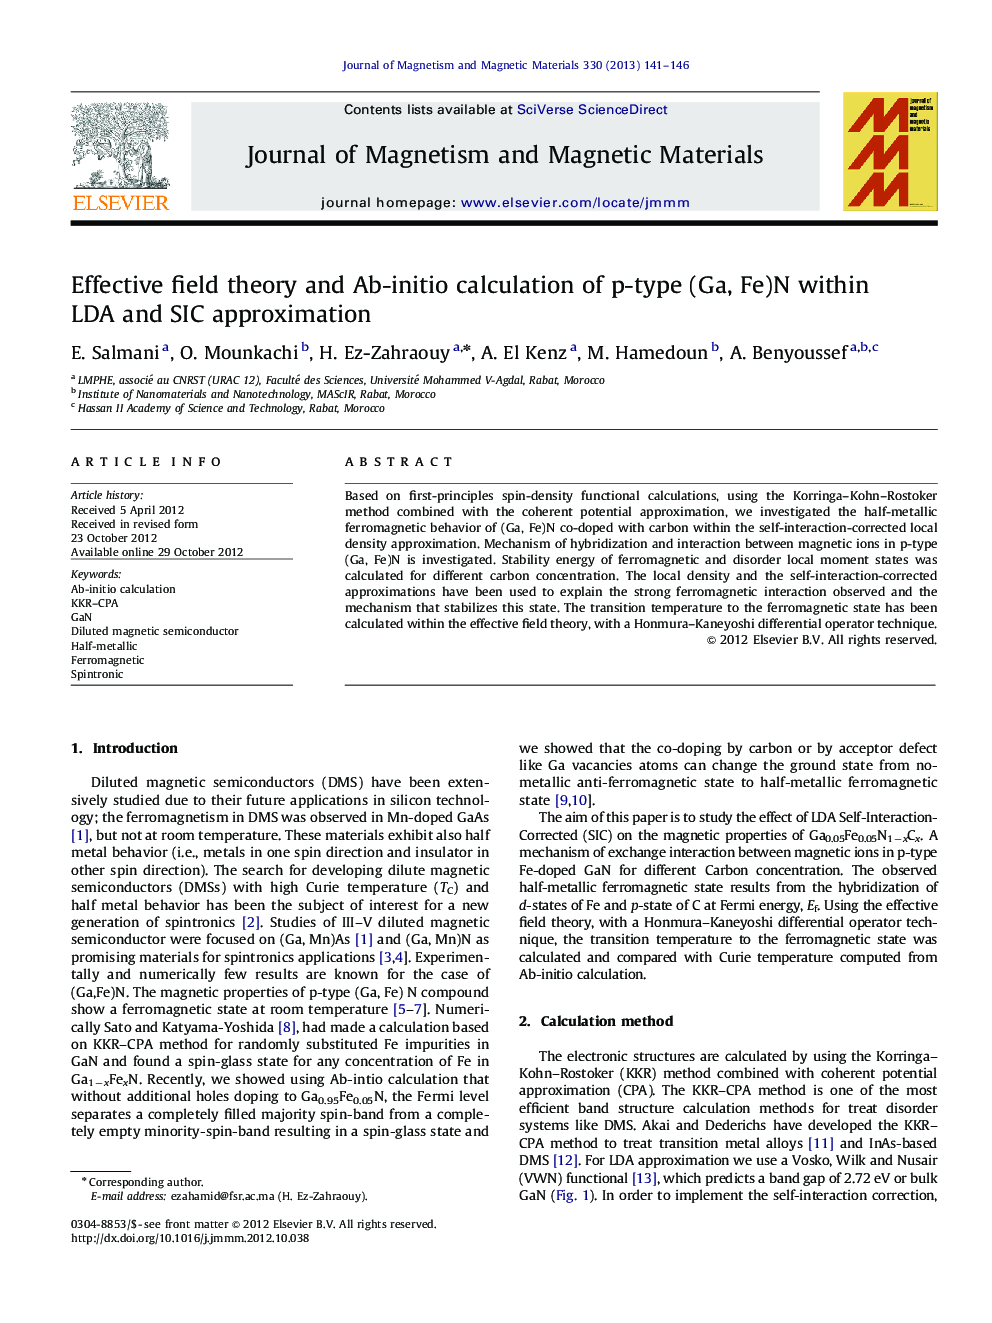 Effective field theory and Ab-initio calculation of p-type (Ga, Fe)N within LDA and SIC approximation